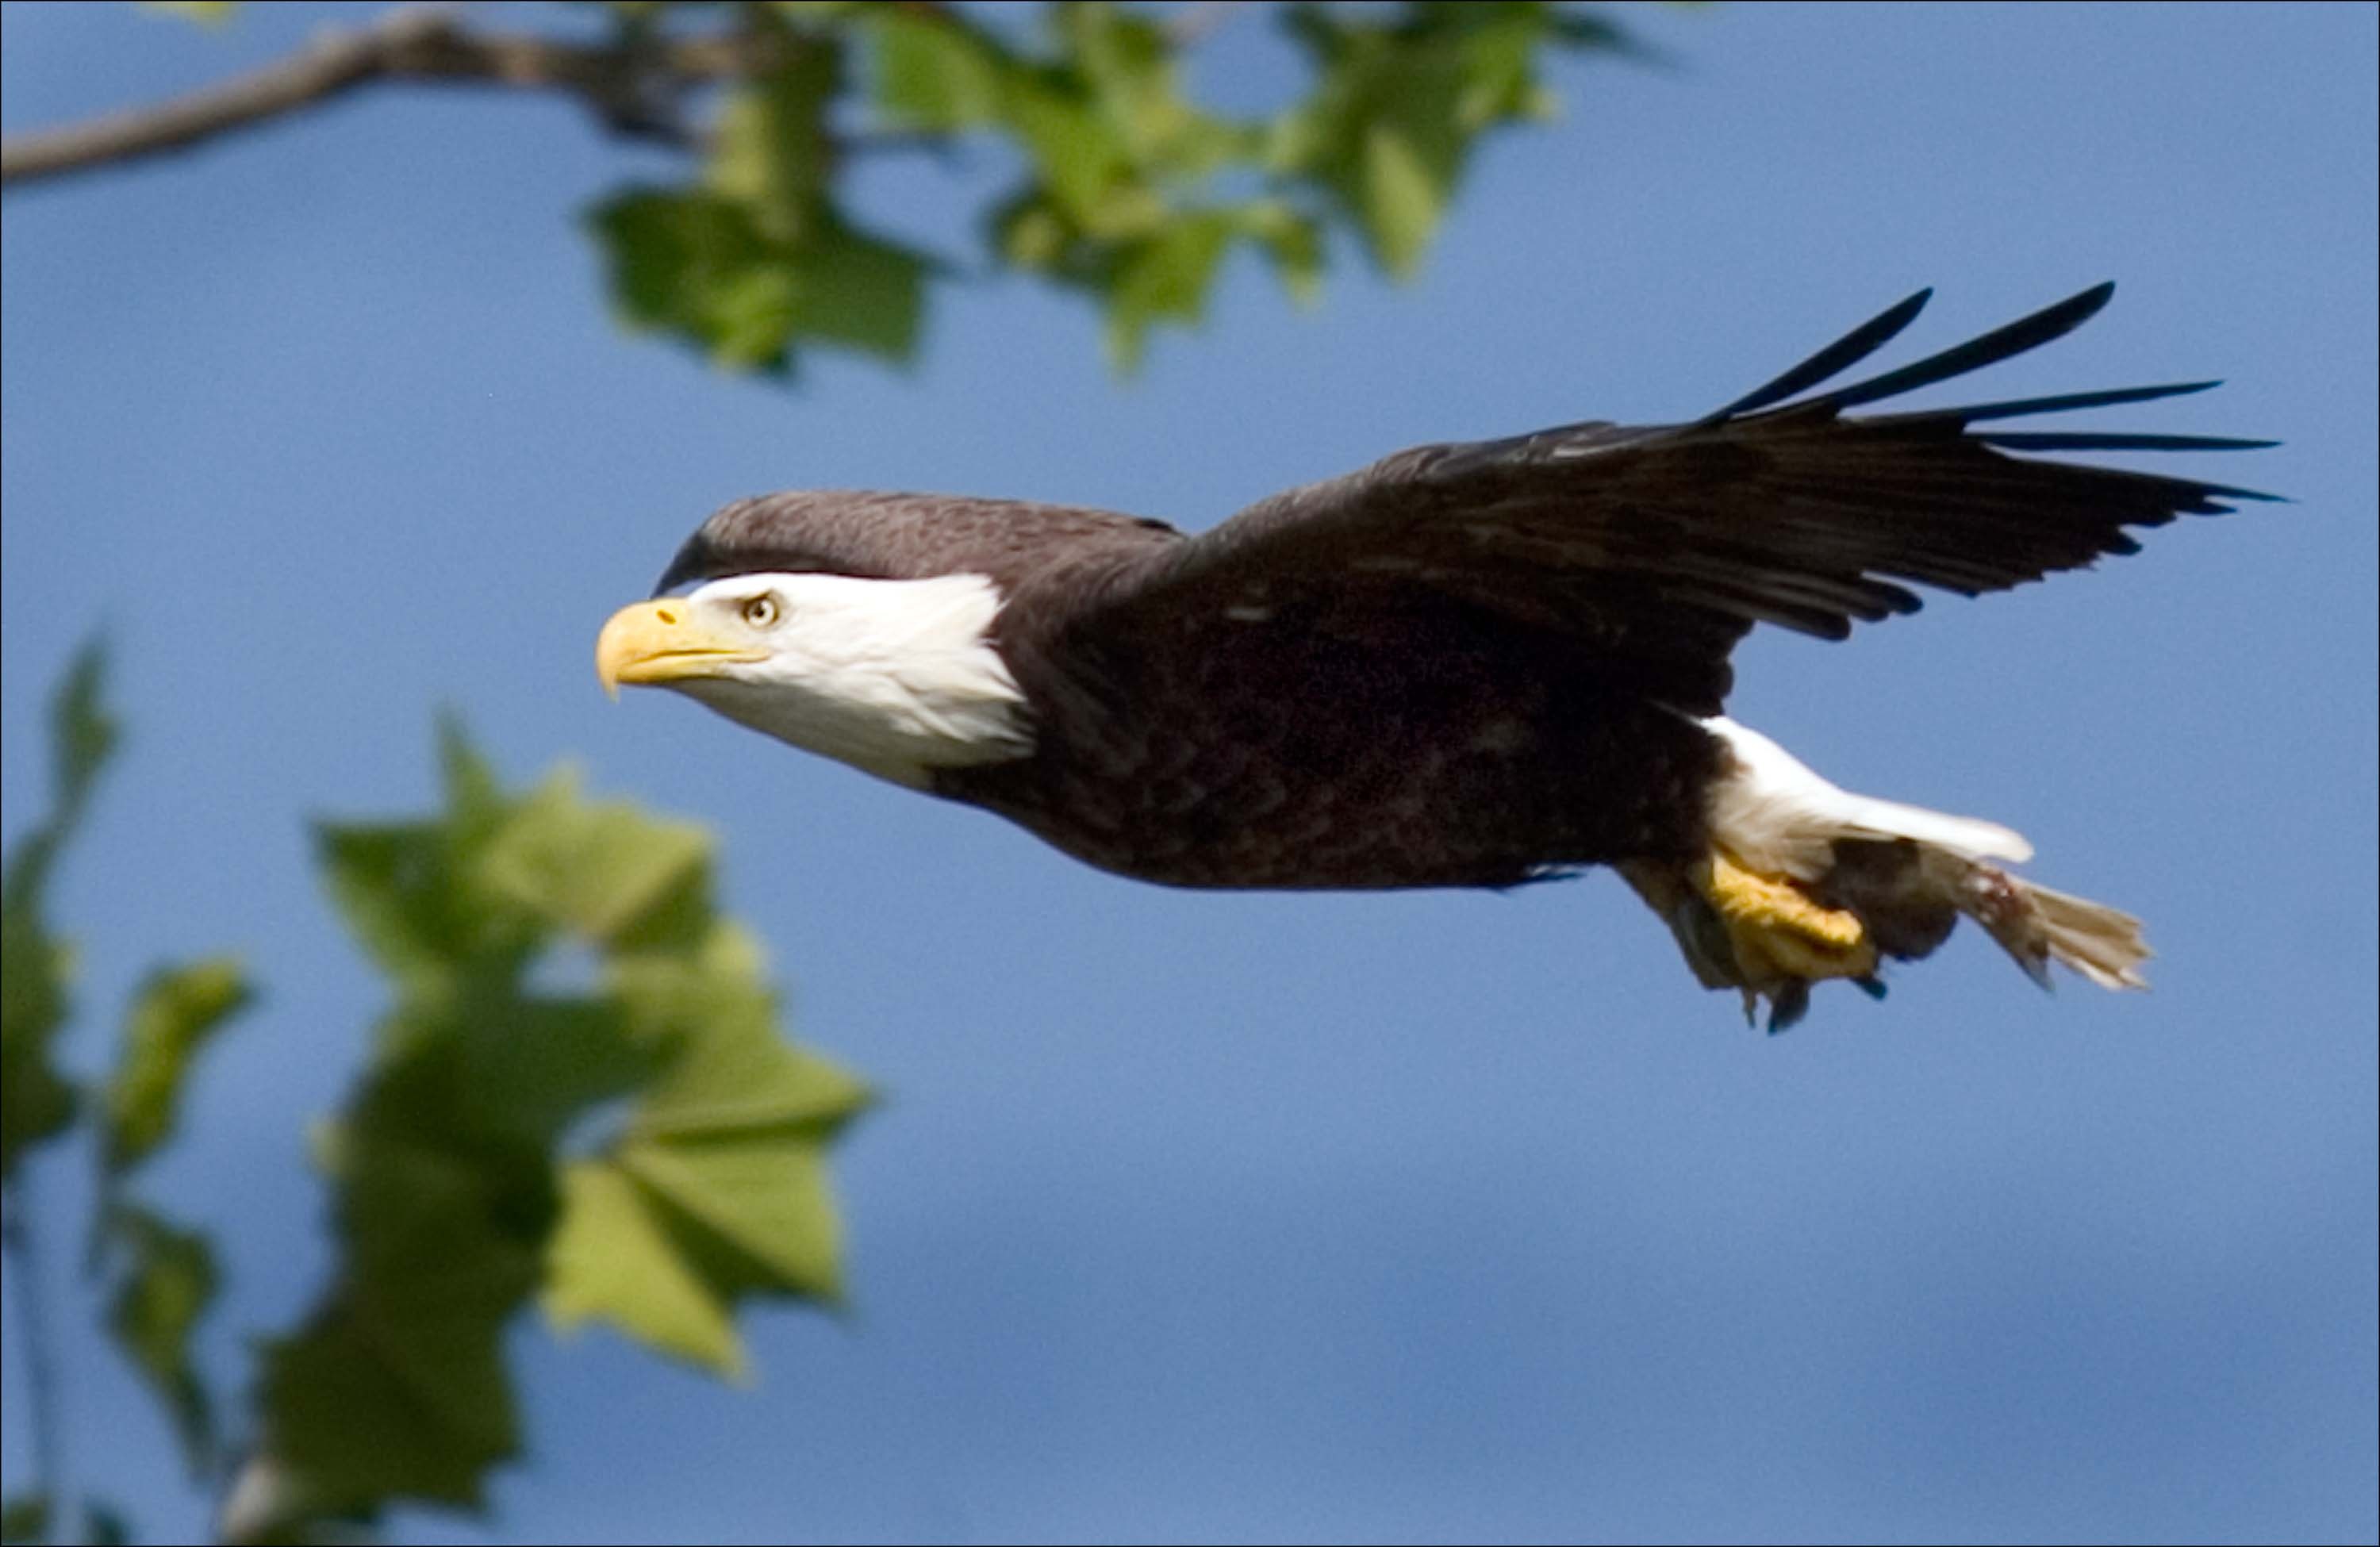 Free photo Flight of a white-headed eagle against the background of tree branches